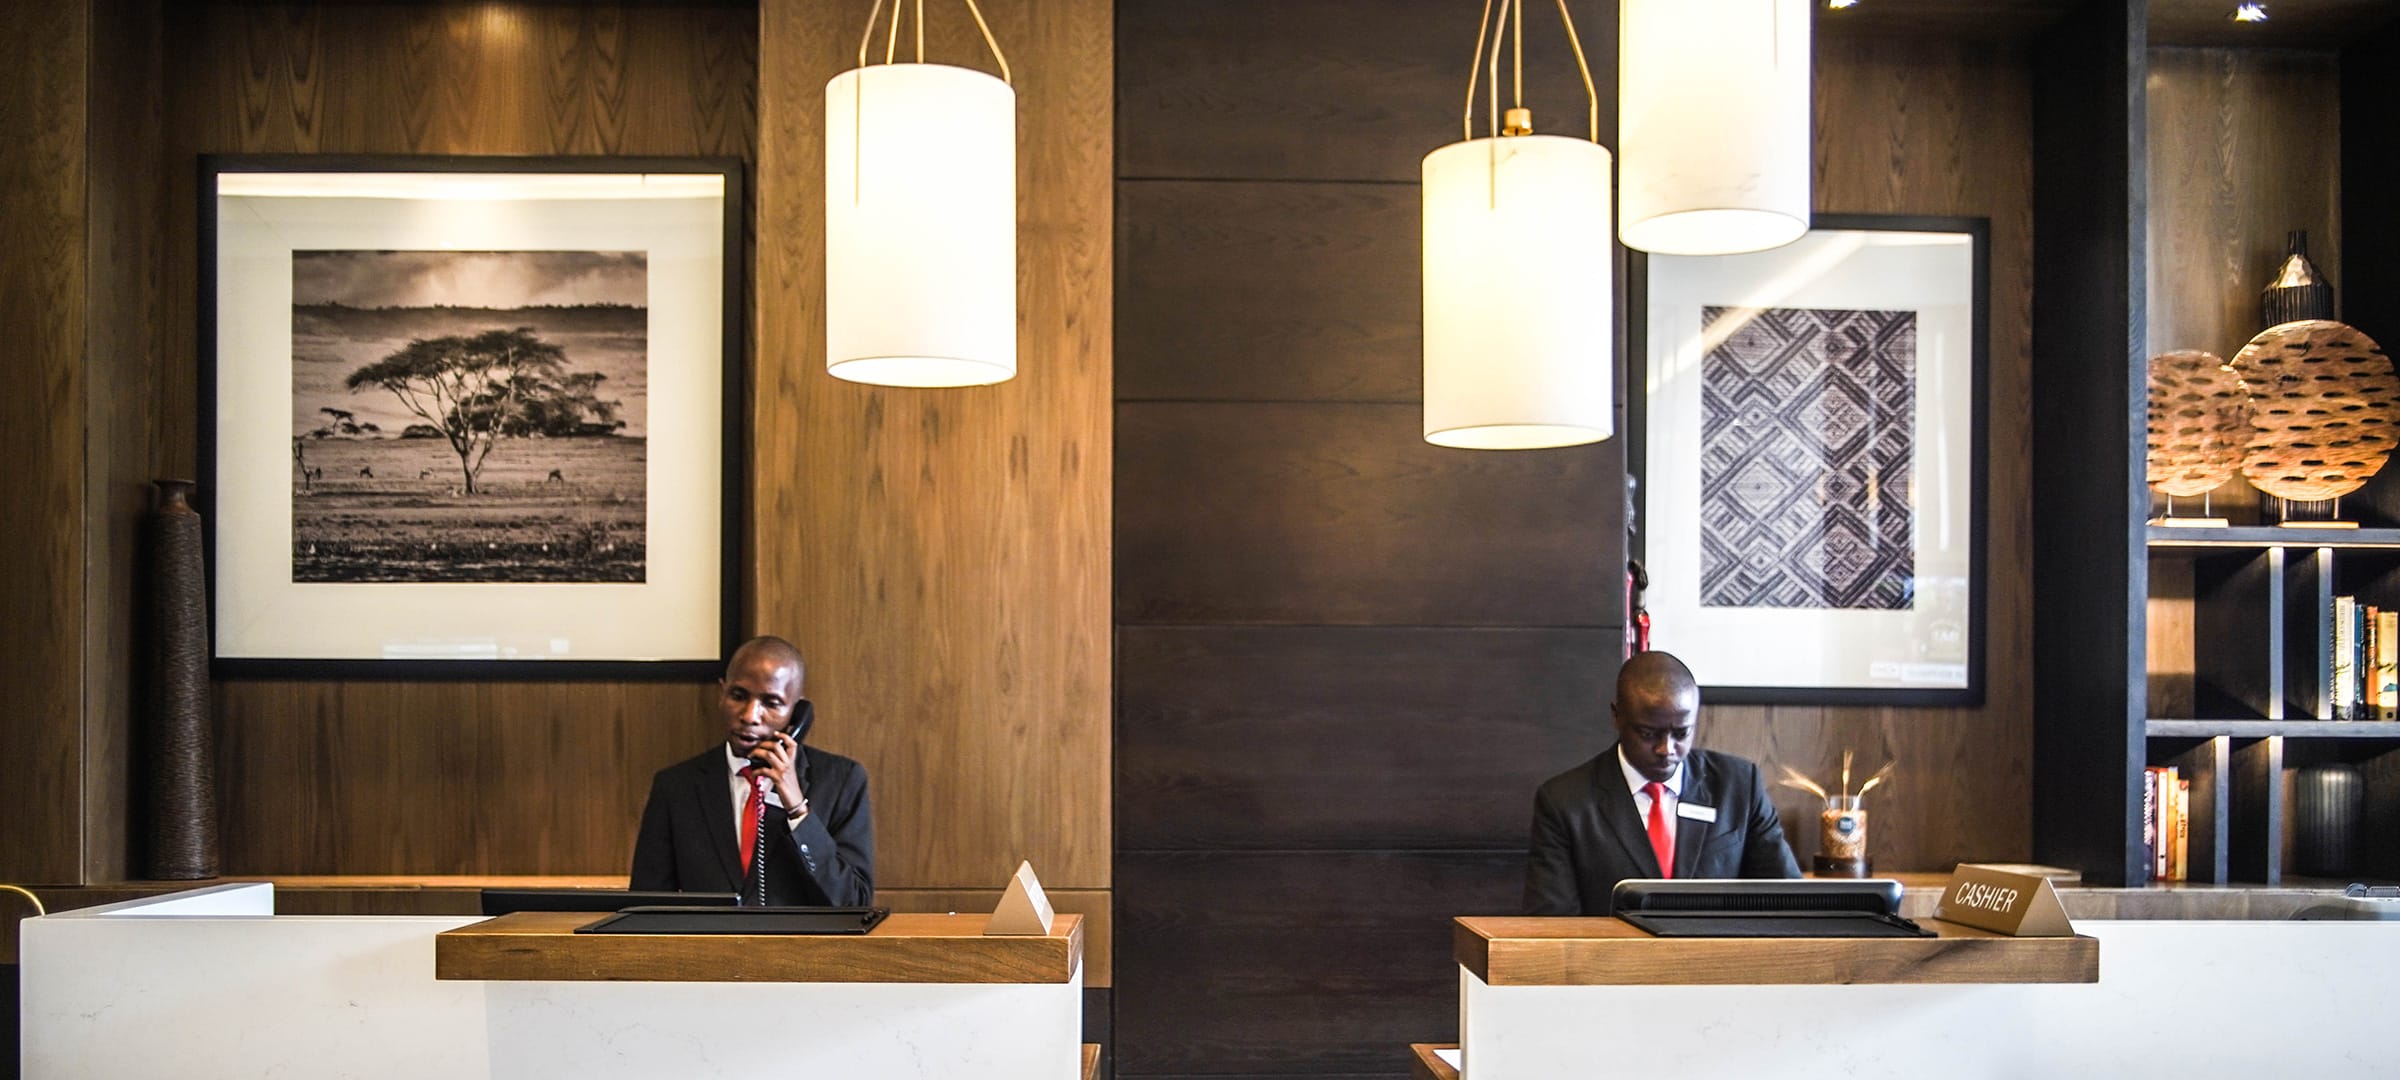 Four Points by Sheraton, Hurlingham